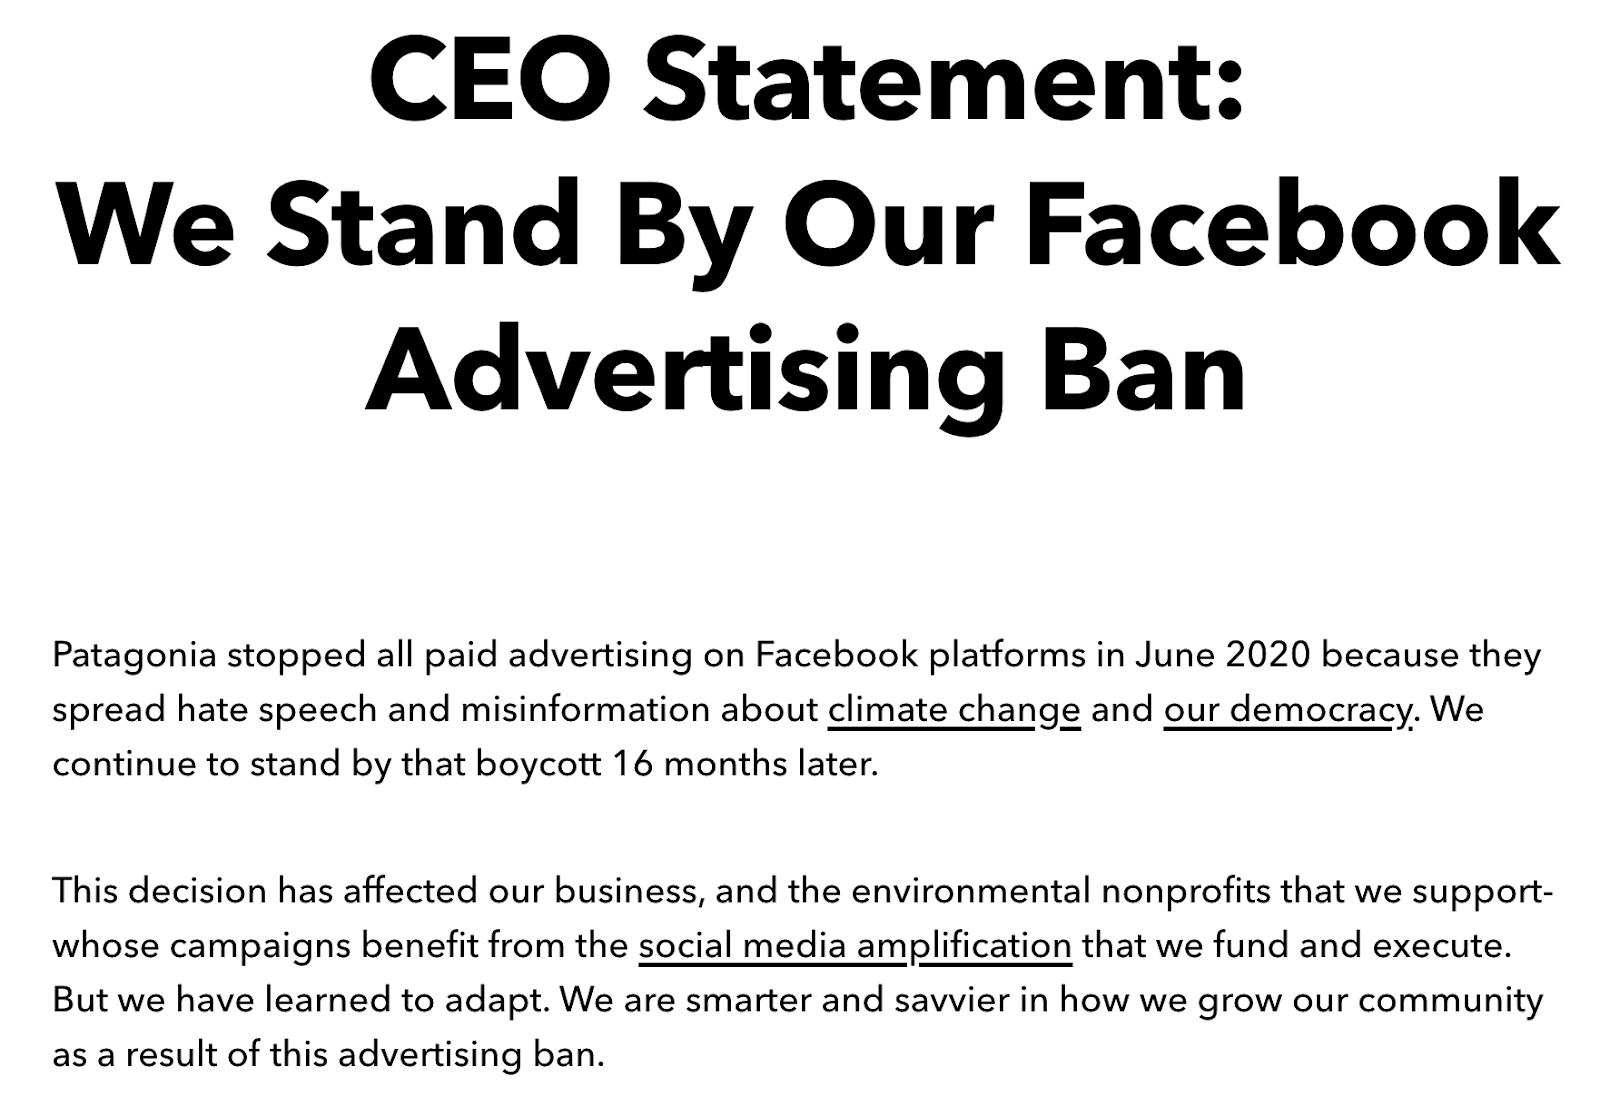 Patagonia's CEO Statement about why they boycotted Facebook ads